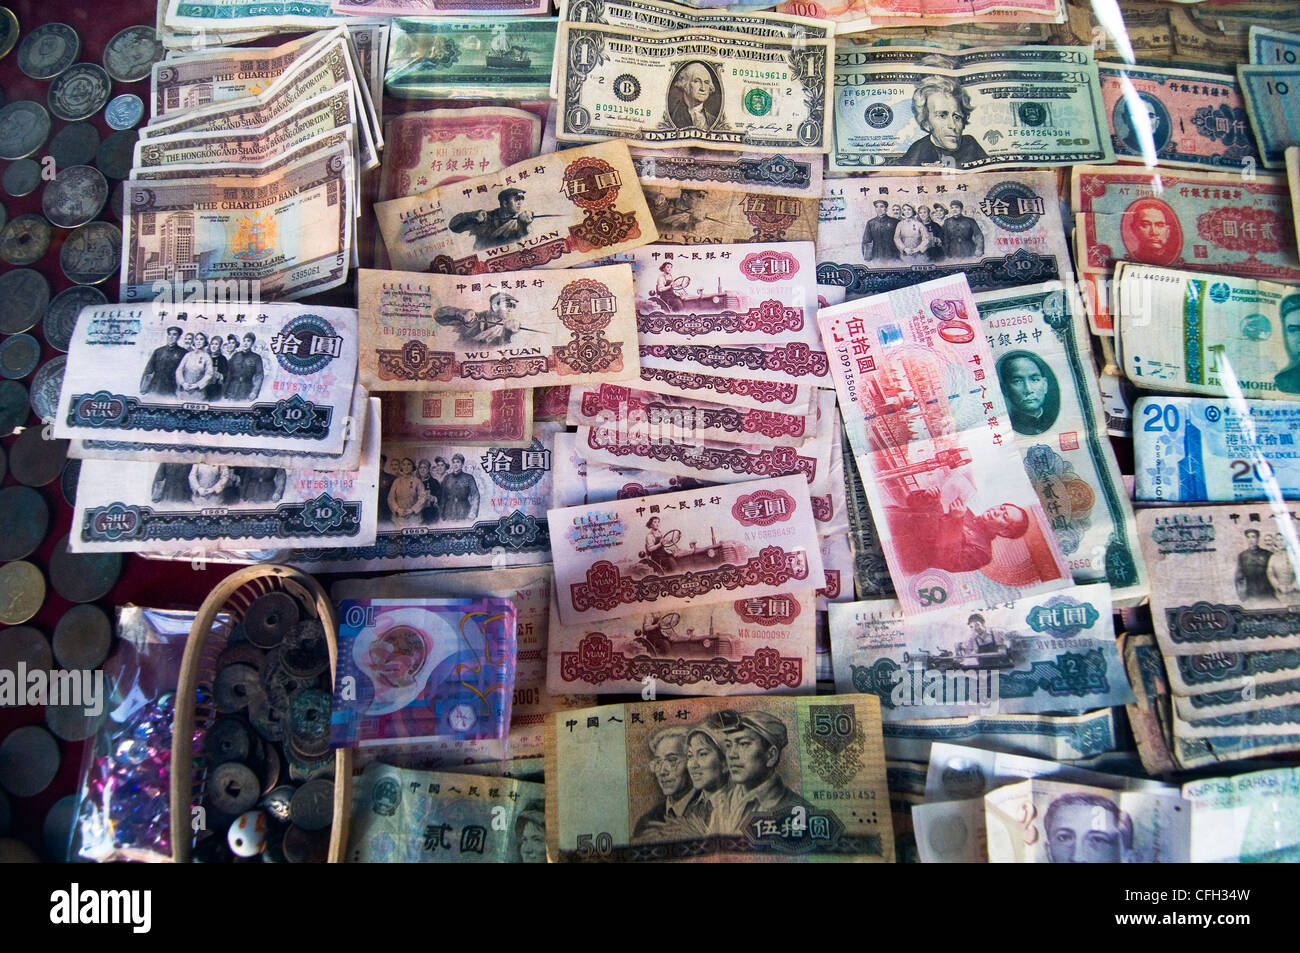 Colorful money notes from around the world Stock Photo: 44016249 - Alamy